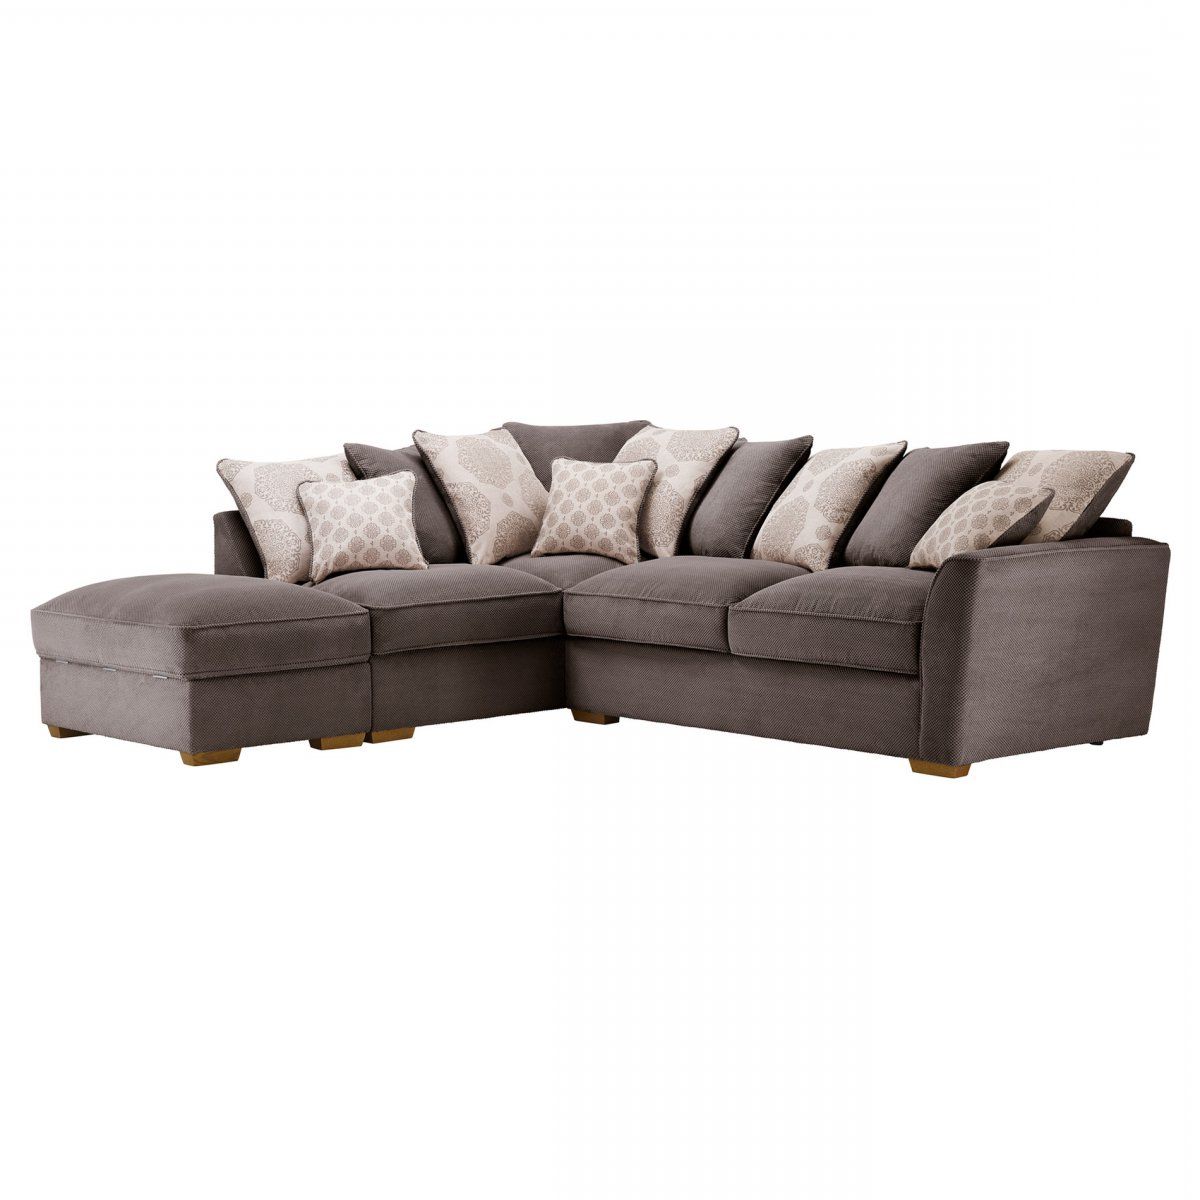 Nebraska Pillow Back Left Corner Sofa In Charcoal + Footstool Intended For Most Recent Lyvia Pillowback Sofa Sectional Sofas (View 25 of 25)